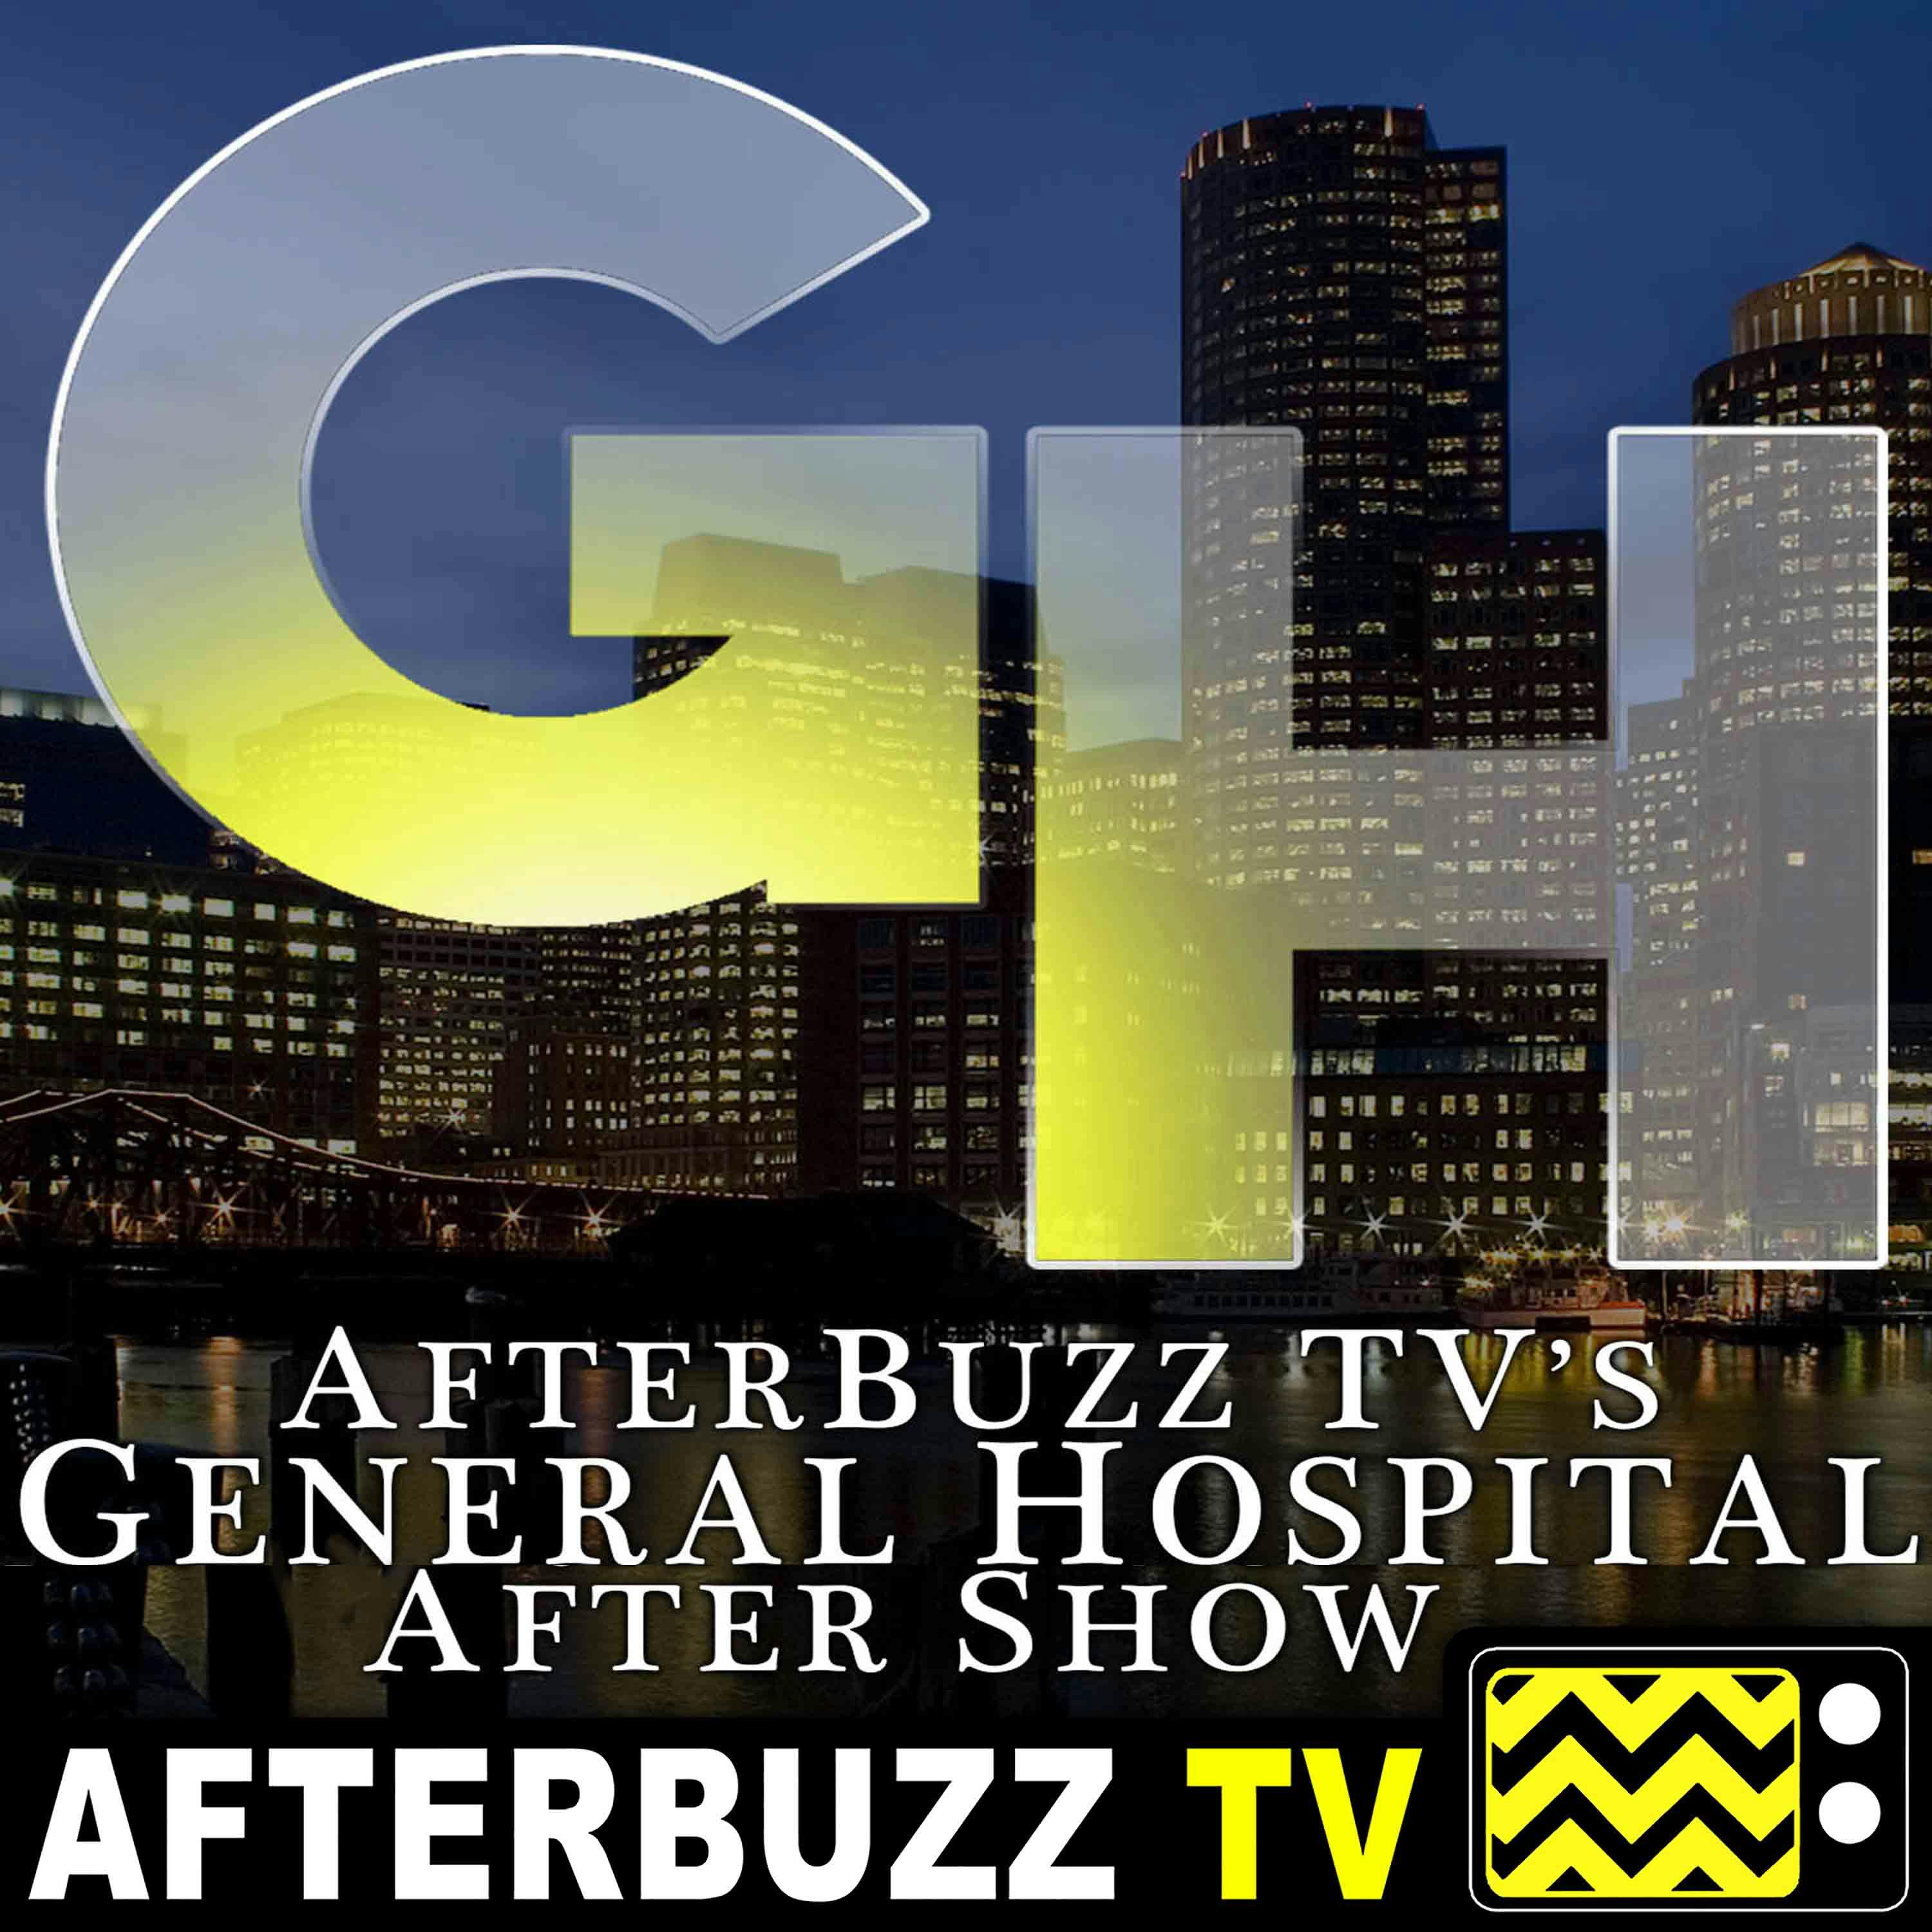 Review Of General Hospital for March 4th - March 8th, 2019